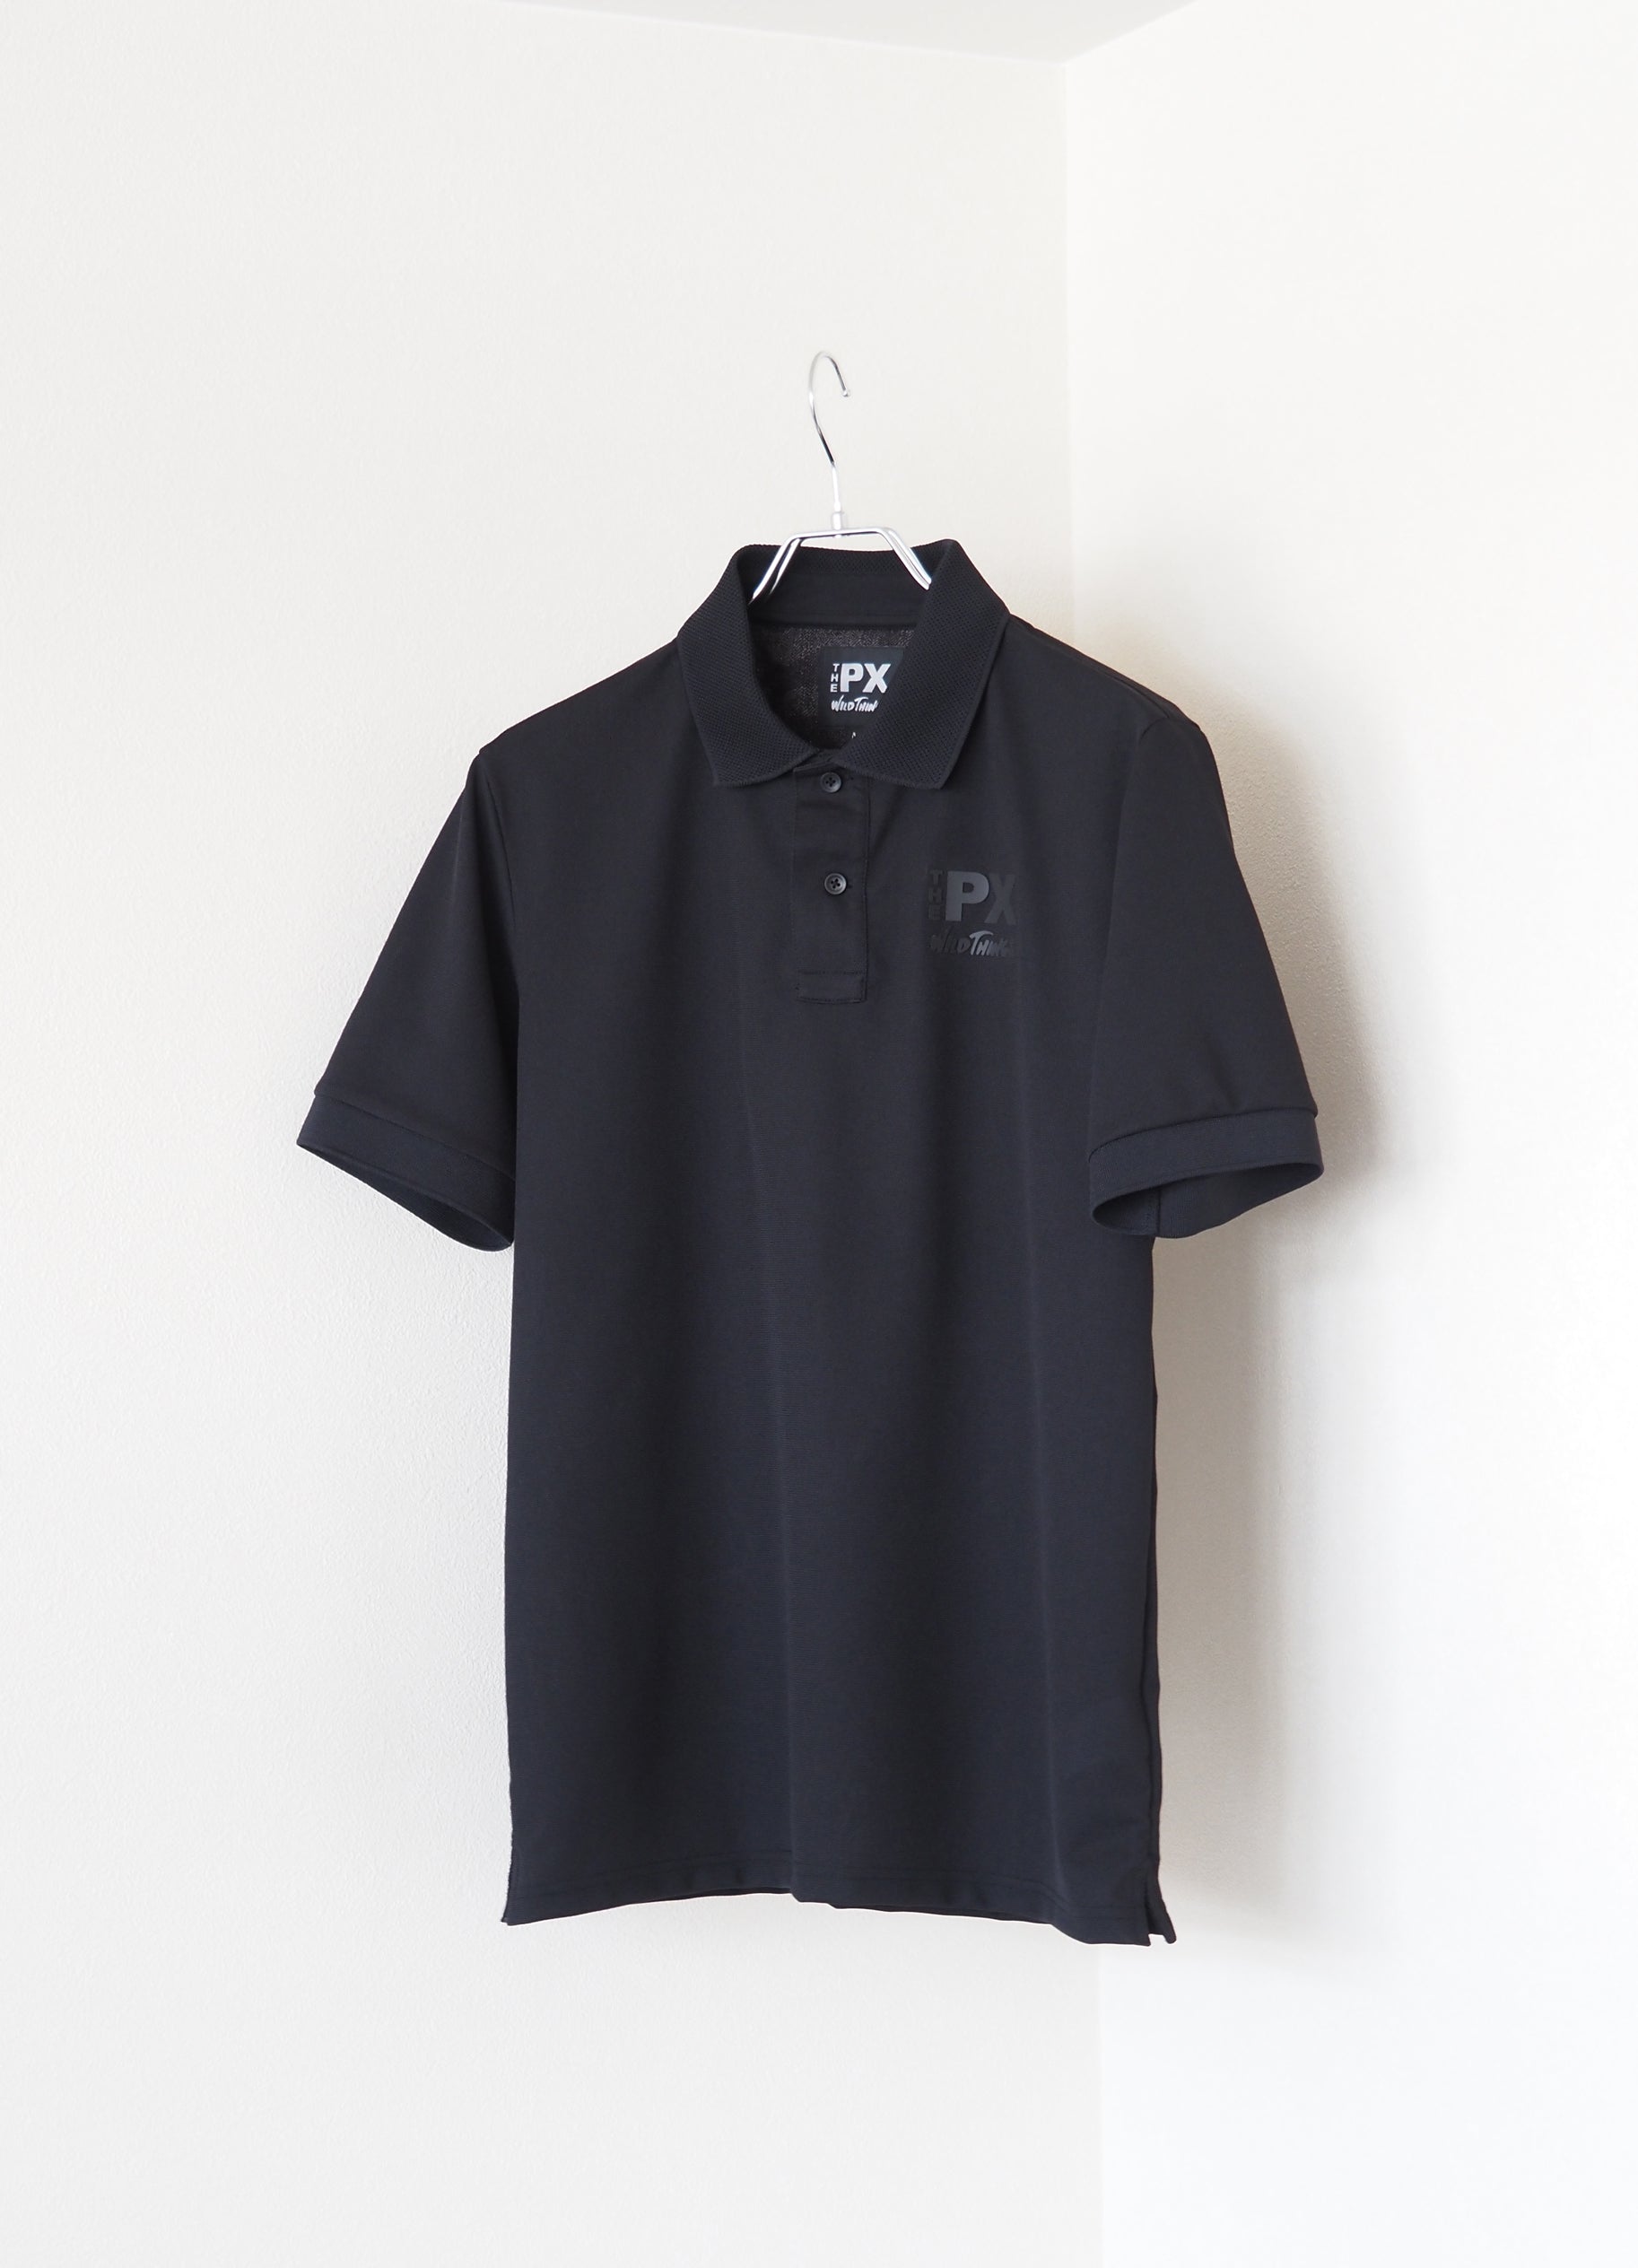 THE PX WILDTHINGS forGOLF / BASIC POLO SHIRTS [WPX230100]【島根県